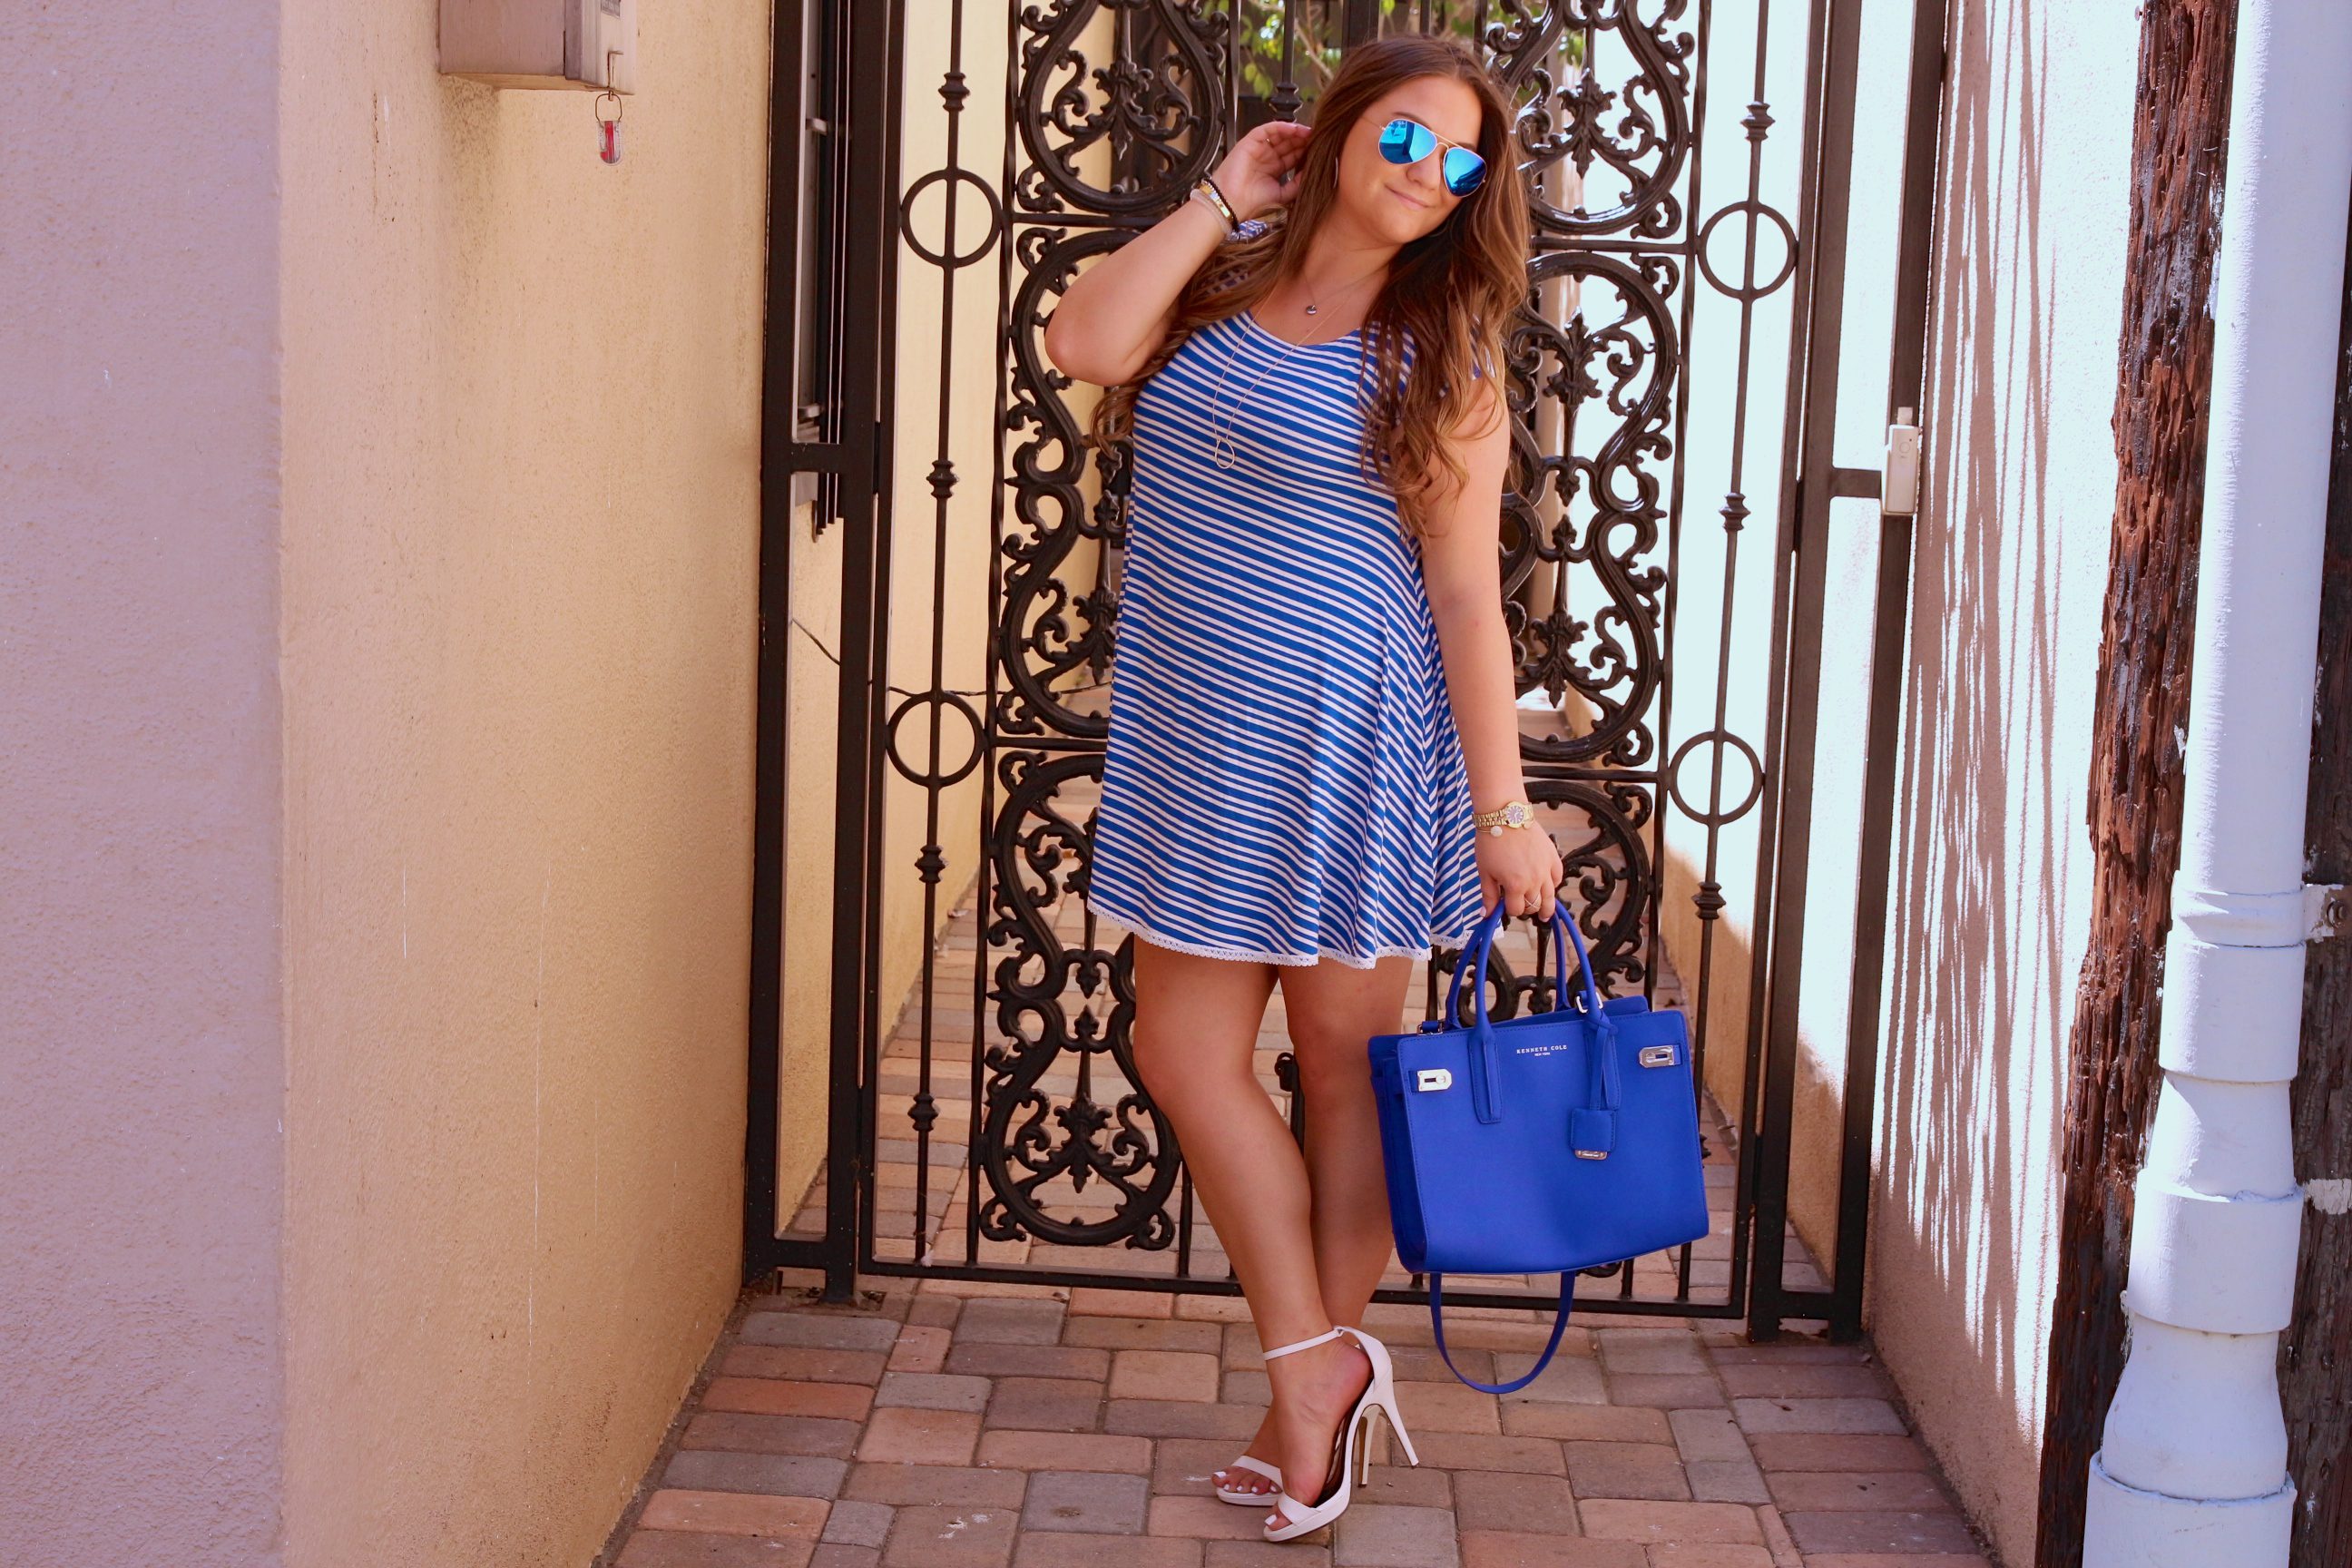 missyonmadison, melissa tierney, fashion blog, fashion blogger, blue satchel, kenneth cole satchel, kenneth cole blue satchel, cobalt blue satchel, white and blue striped dress, striped dress, ami clubwear, ami clubwear striped dress, ray bans, blue aviators, blue ray bans, white ankle strap heels, white ankle strap sandals, steve madden white heels, white ankle strap steve madden sandals, la blogger, fall fashion, how to wear color in the fall, pops of color,